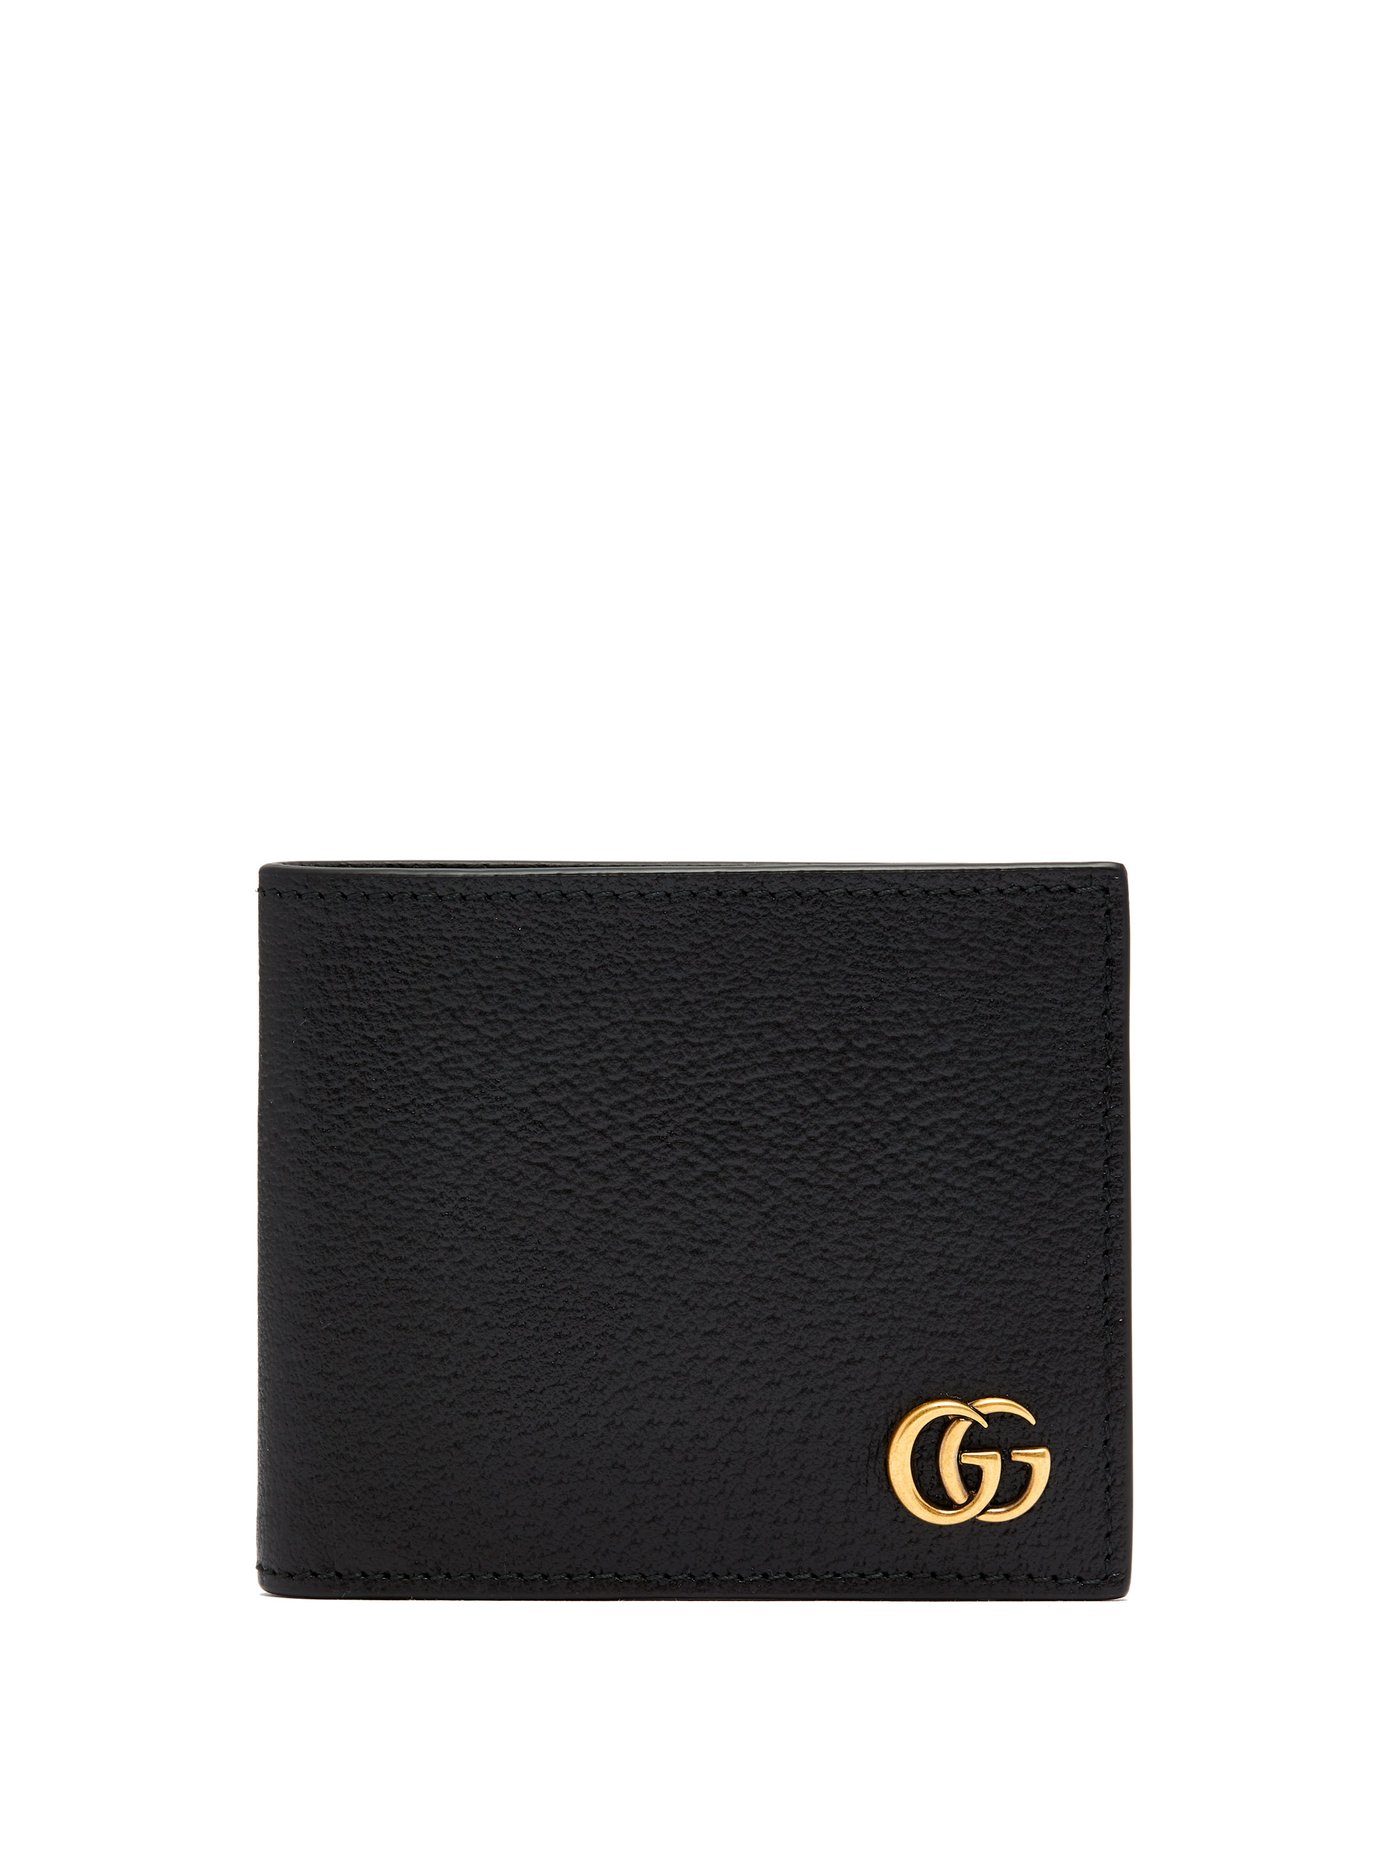 GG Marmont grained-leather bi-fold 